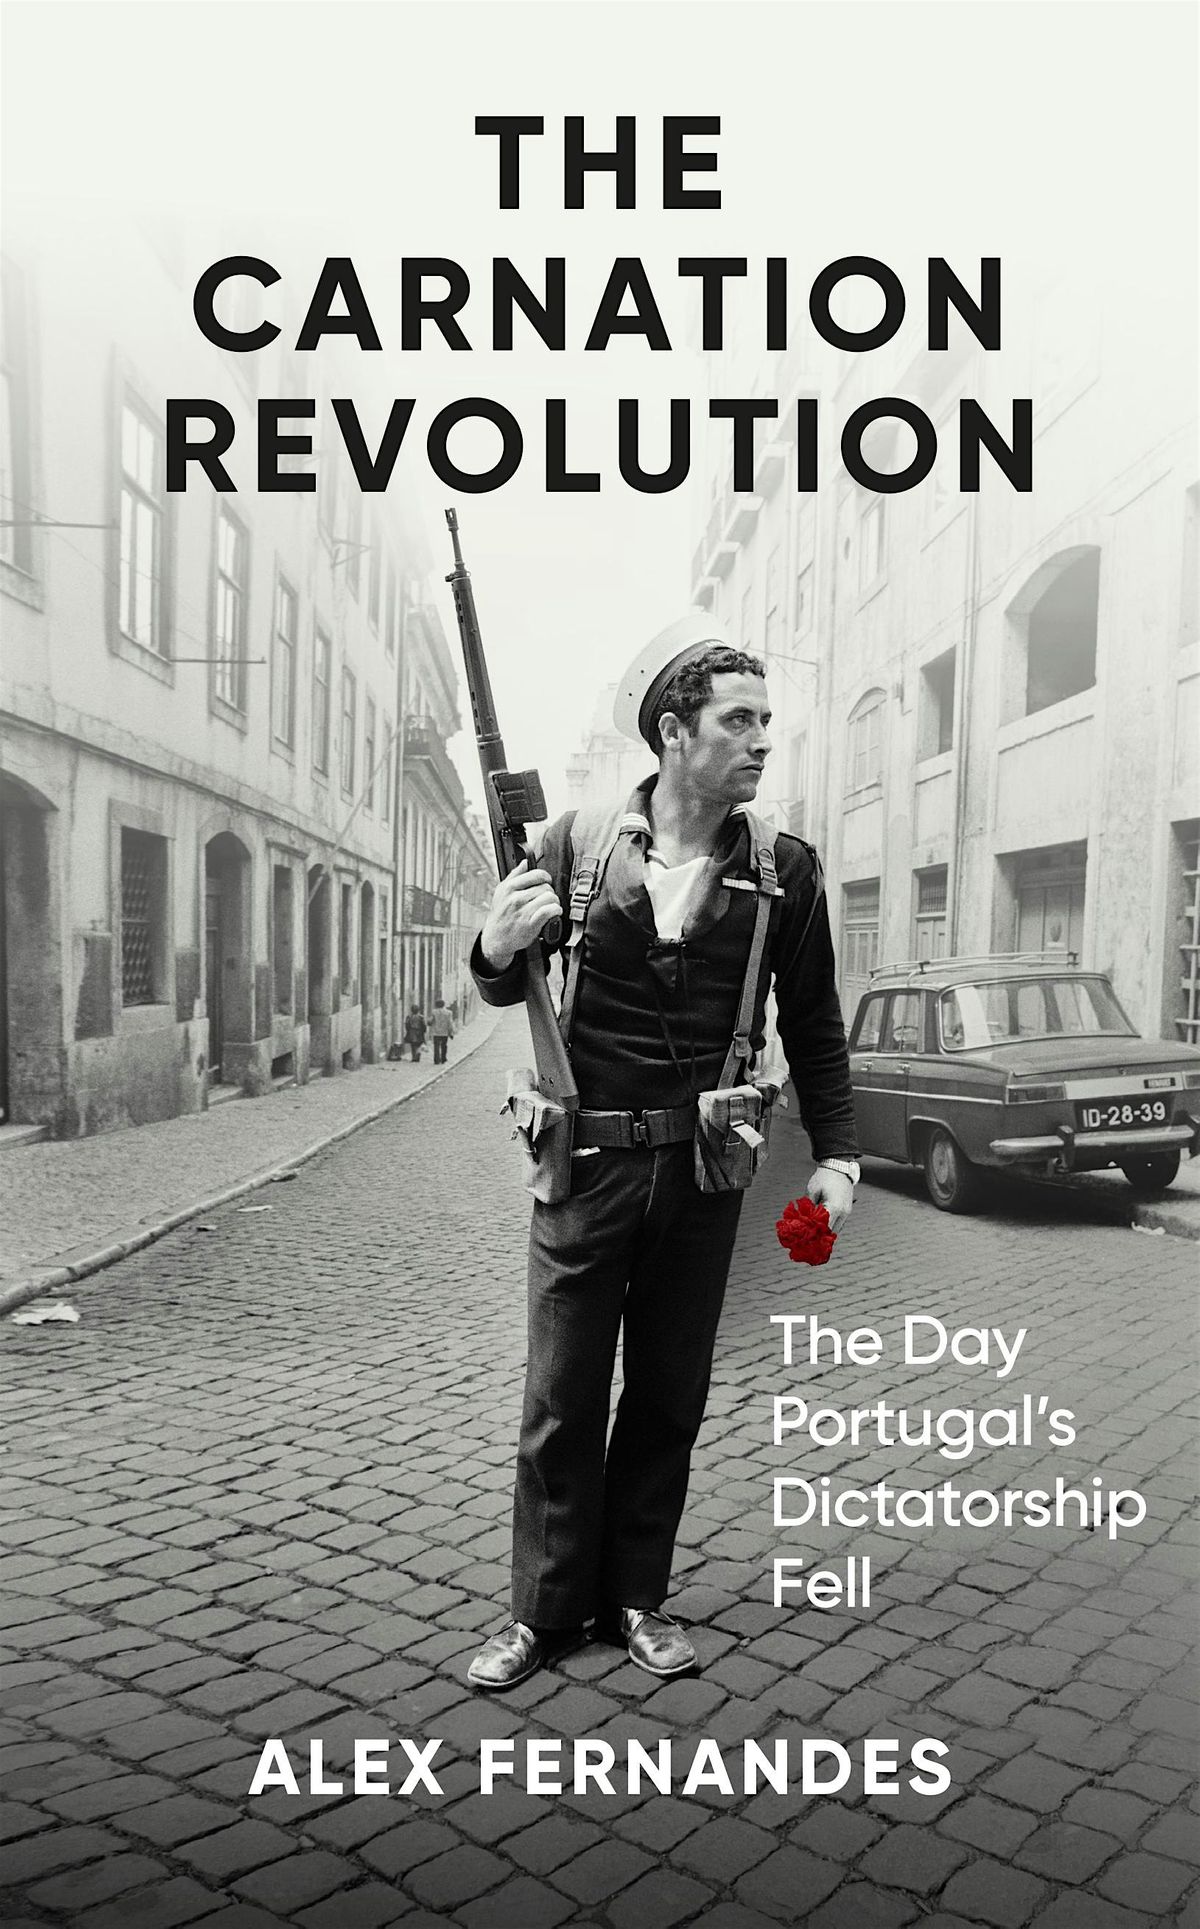 The Radical Readers Discuss The Carnation Revolution